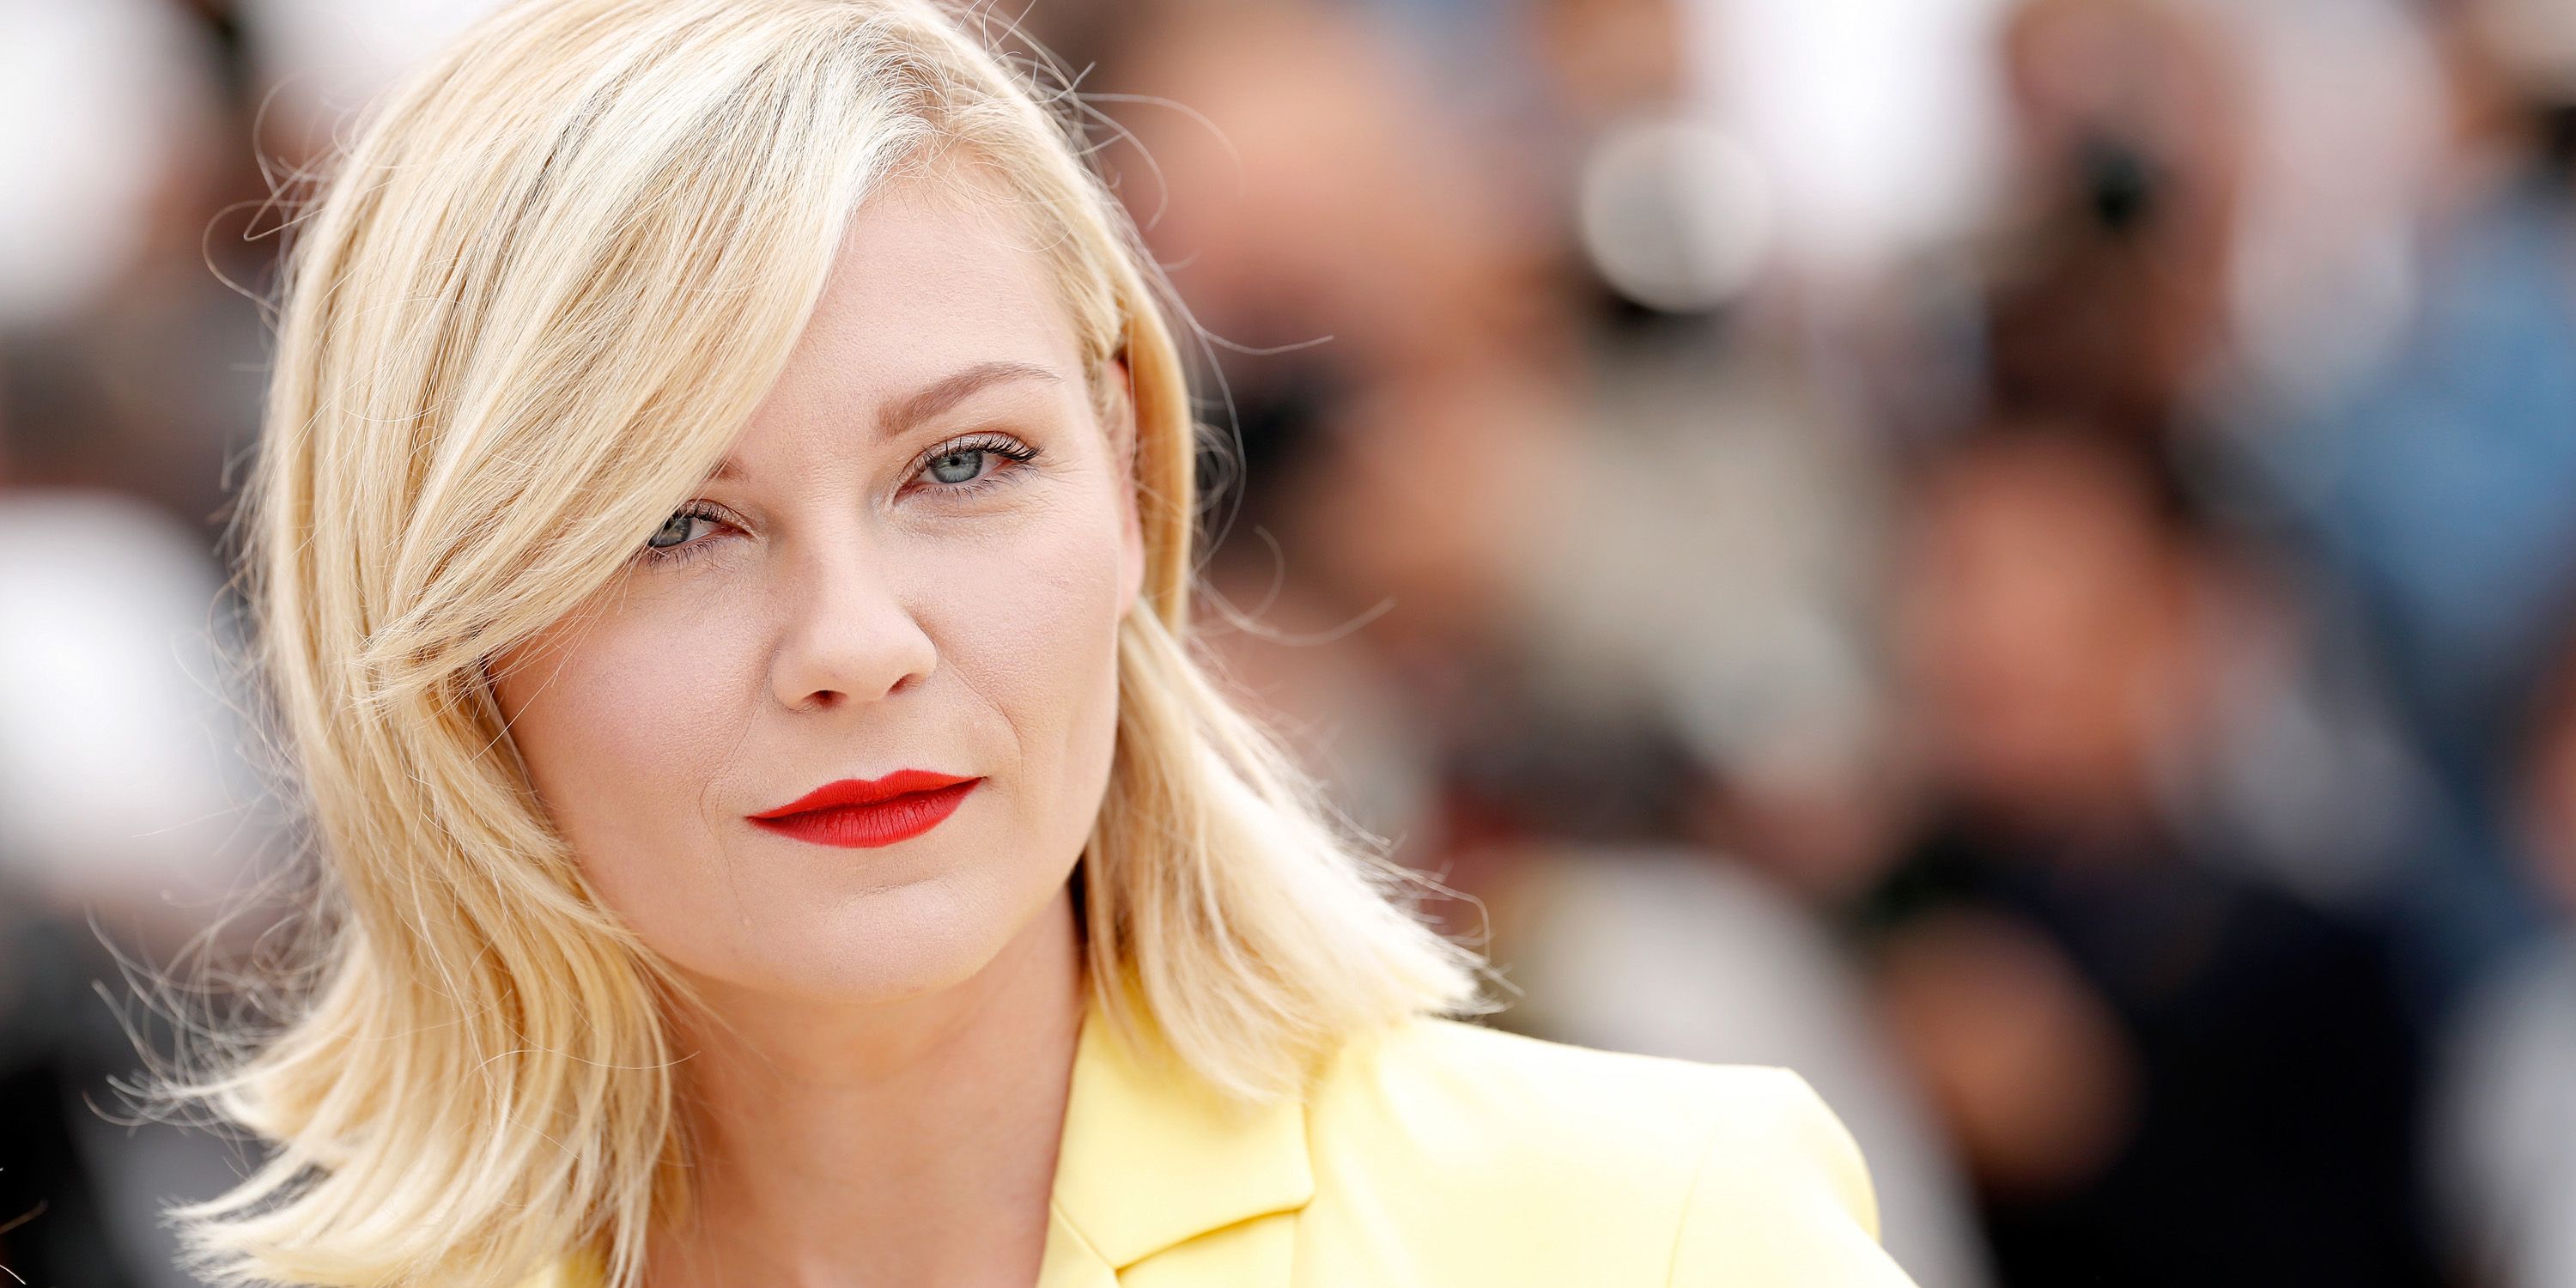 Kirsten Dunst Hairstyles Hair Cuts and Colors